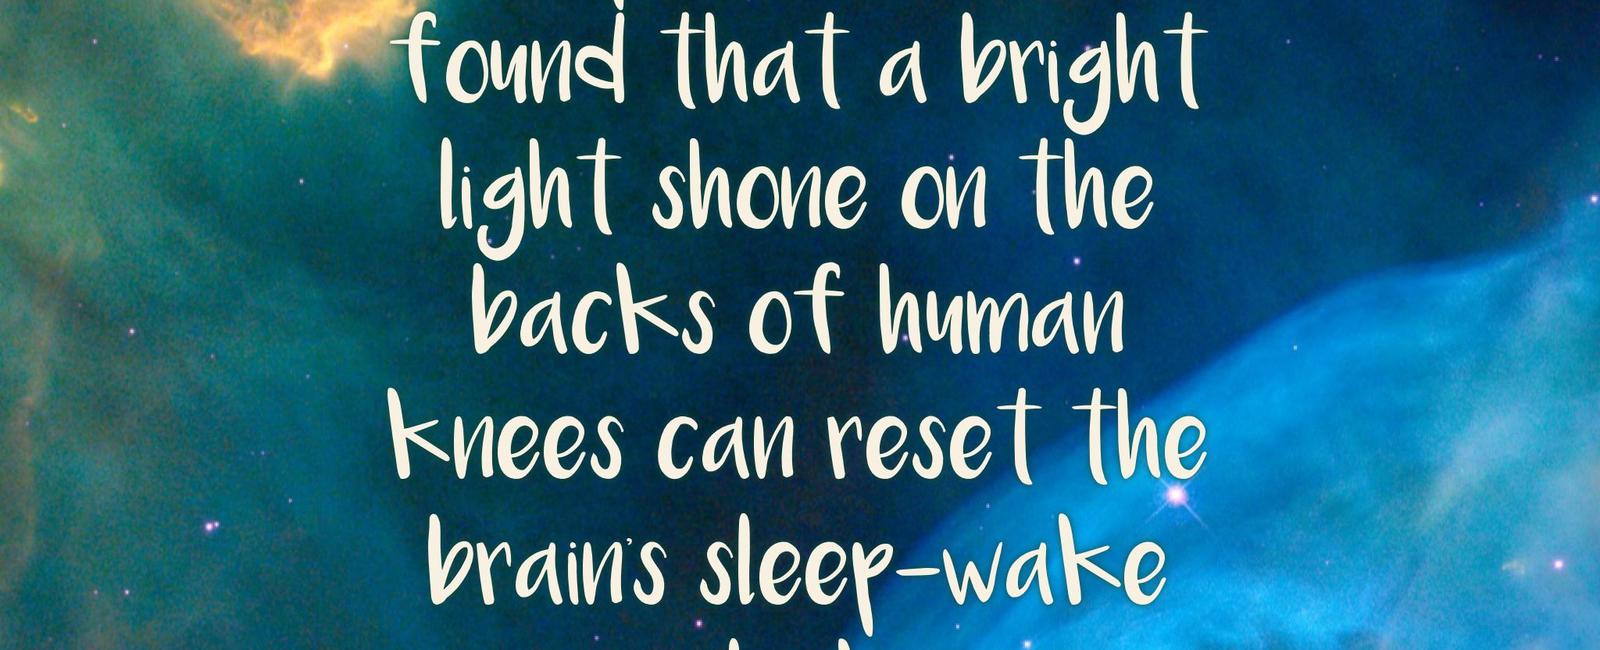 An experiment in 1998 found that a bright light shone on the backs of human knees can reset the brain s sleep wake clock